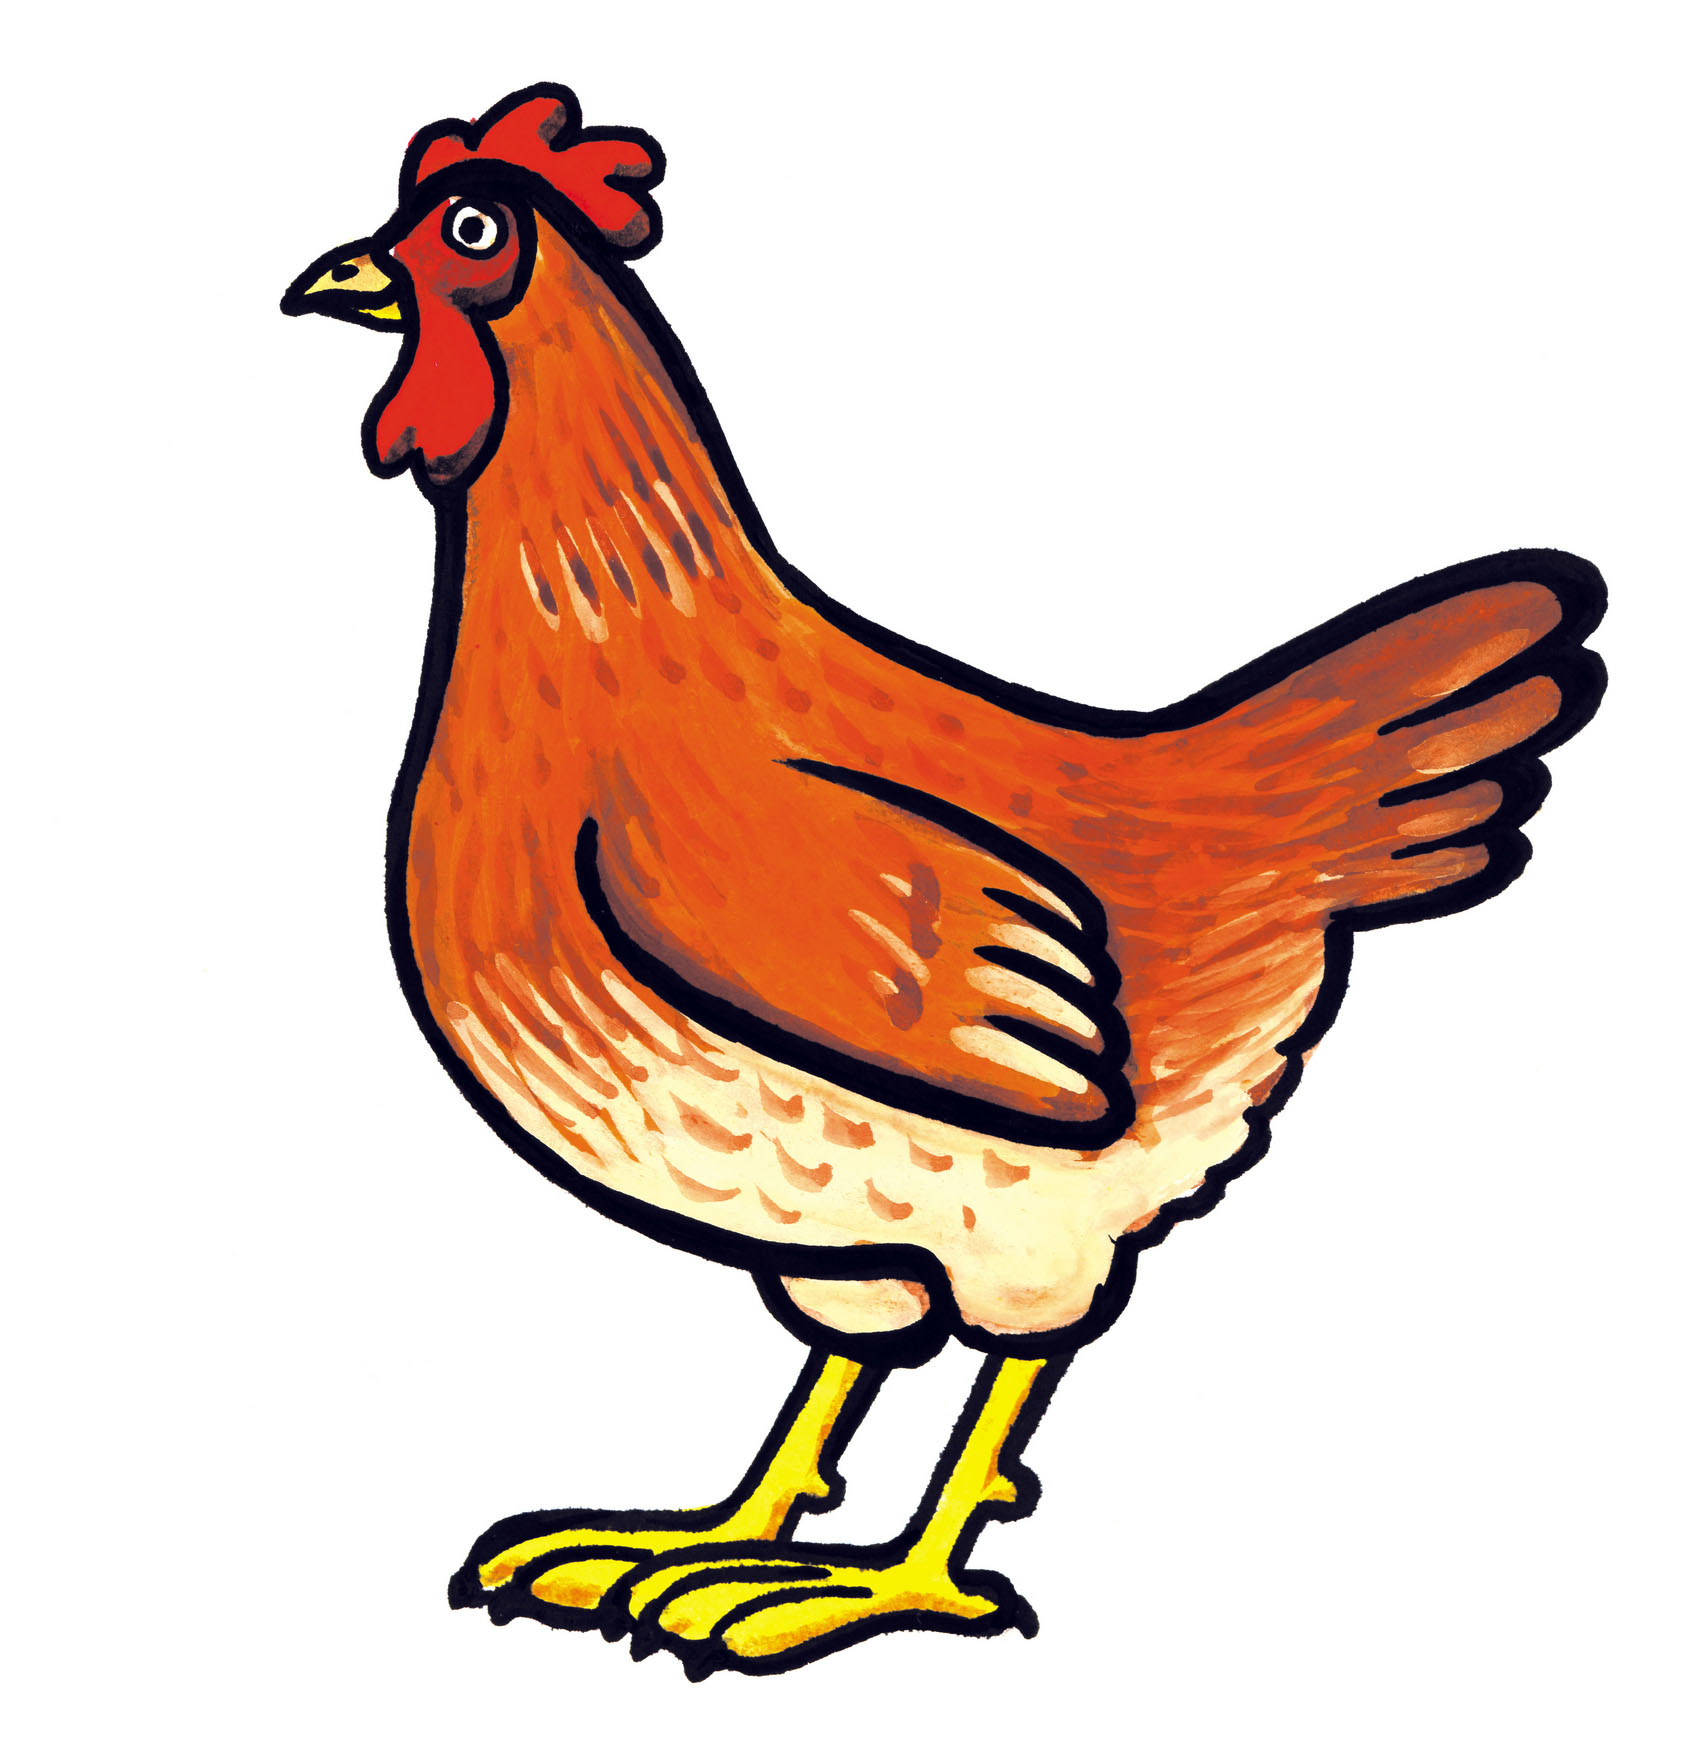 The Hen - The Story Home Children's Audio